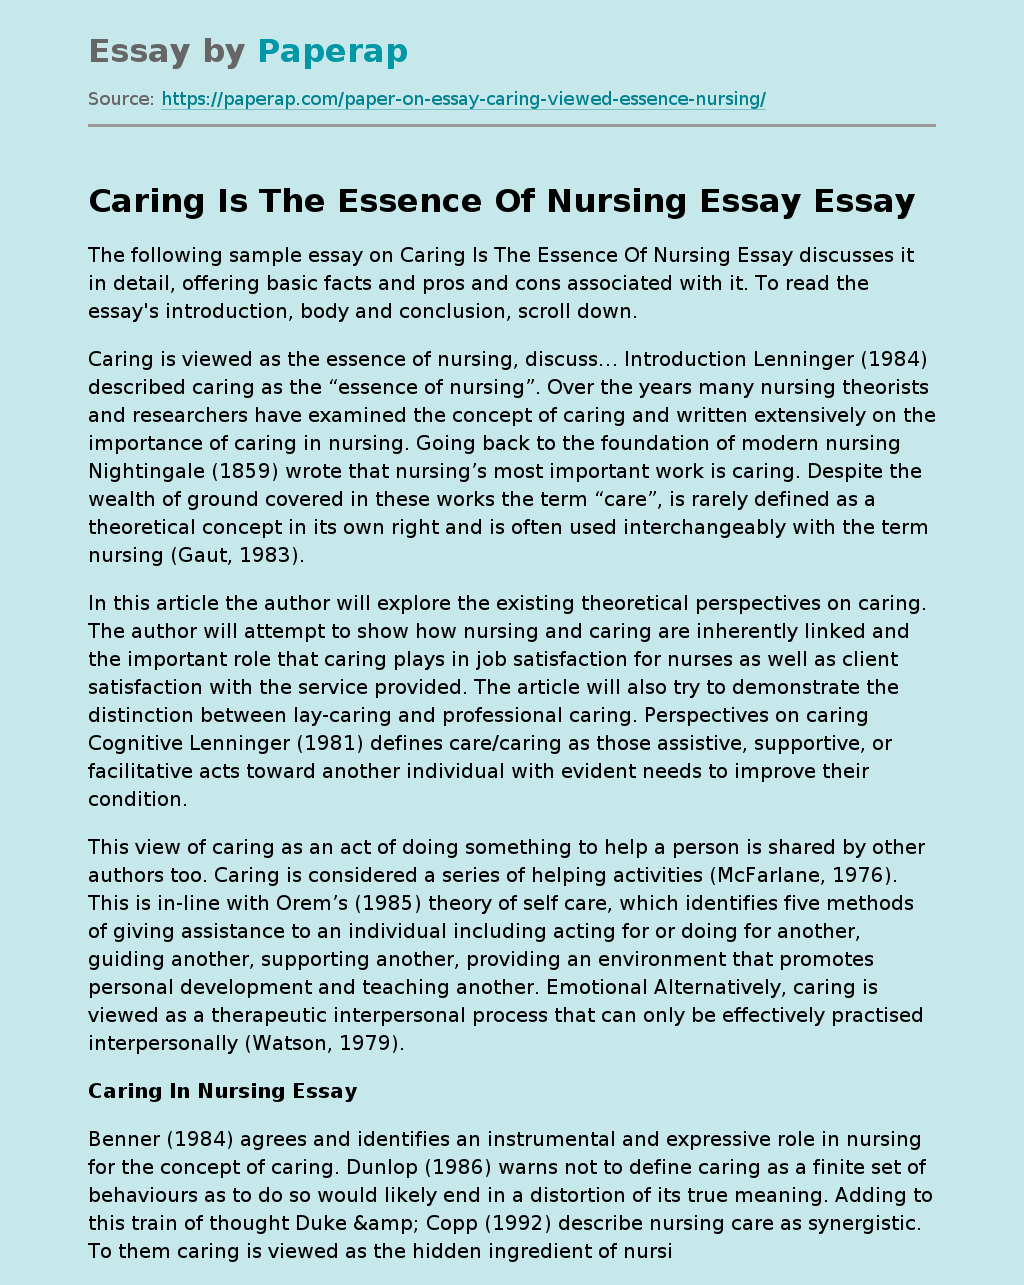 Caring Is The Essence Of Nursing Essay